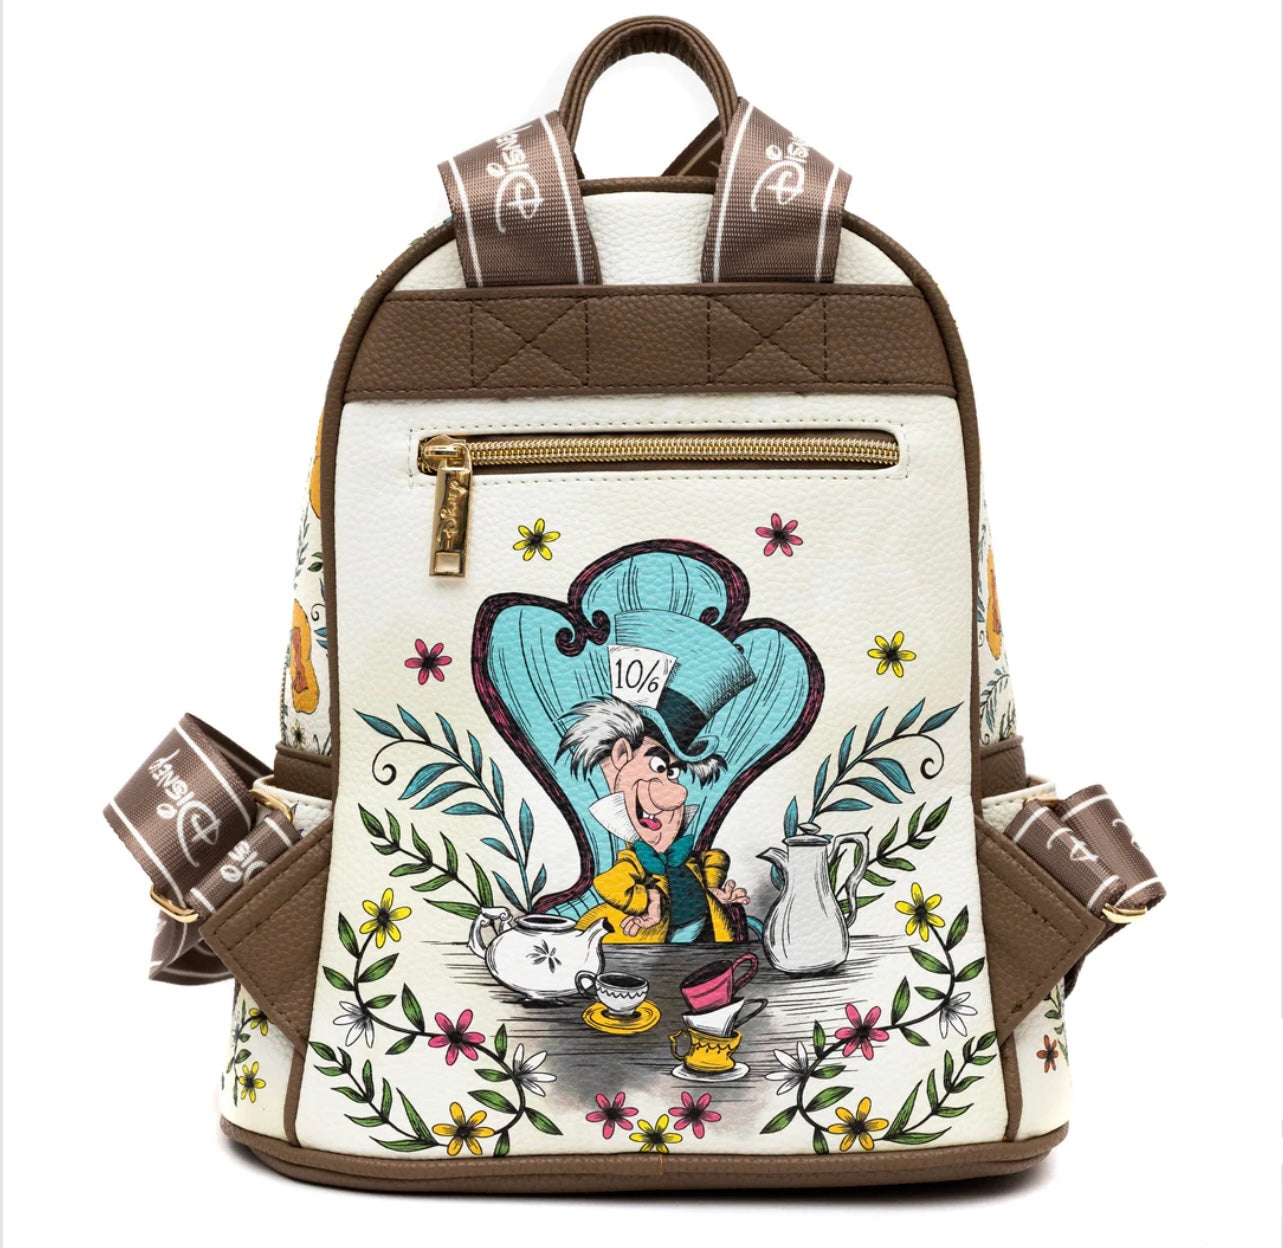 Exclusive Limited Edition -Alice in Wonderland Vegan Leather Backpack